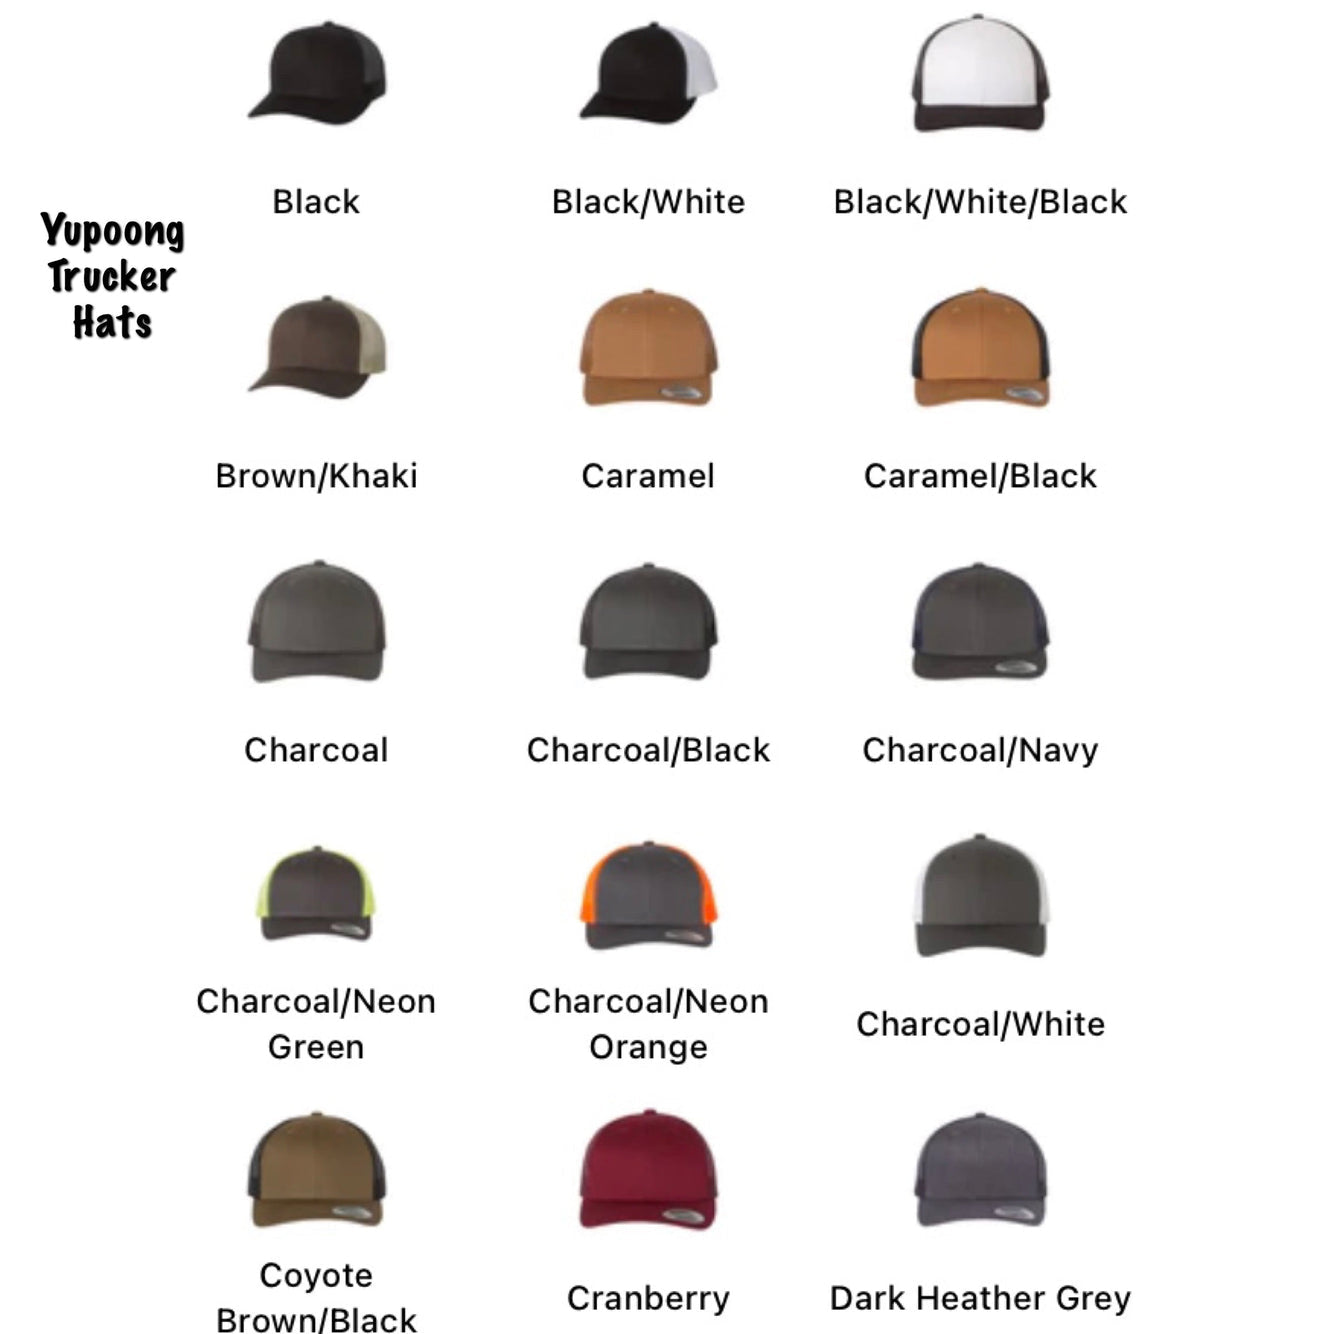 Custom Business Hats | Real Leather Logo Patches | Custom Business Hats | Wholesale Trucker Hats 6 QTY